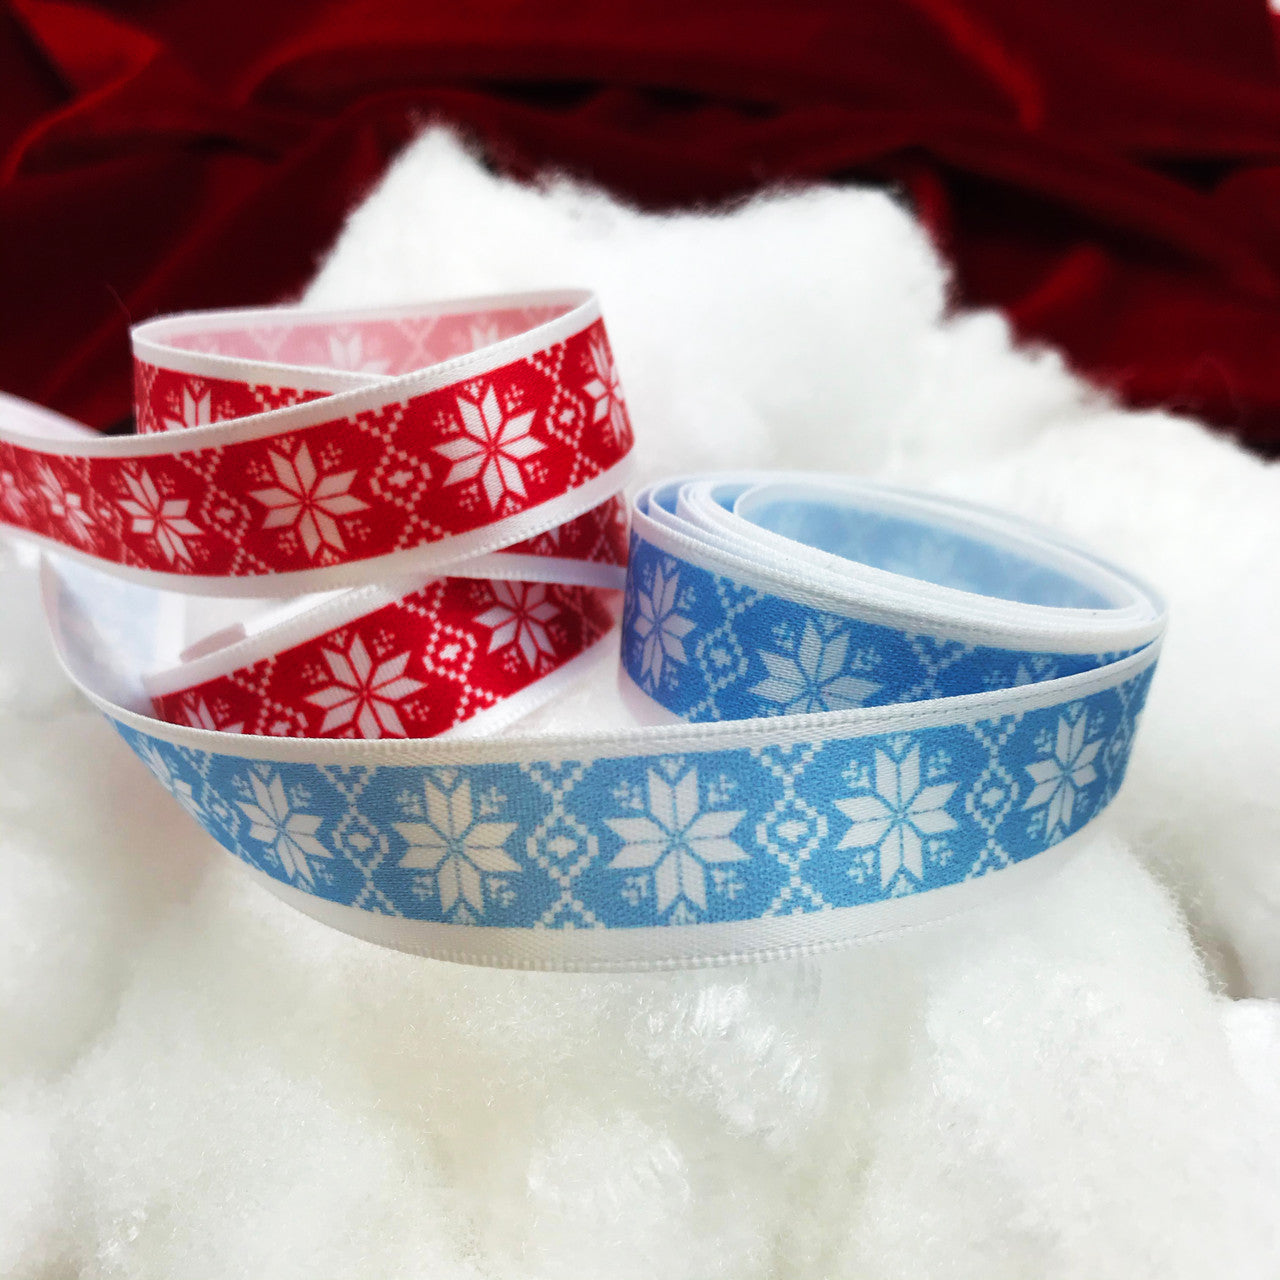 Our Nordic design snowflake ribbons are available on red and ice blue backgrounds printed on 5/8" white single face satin ribbon.